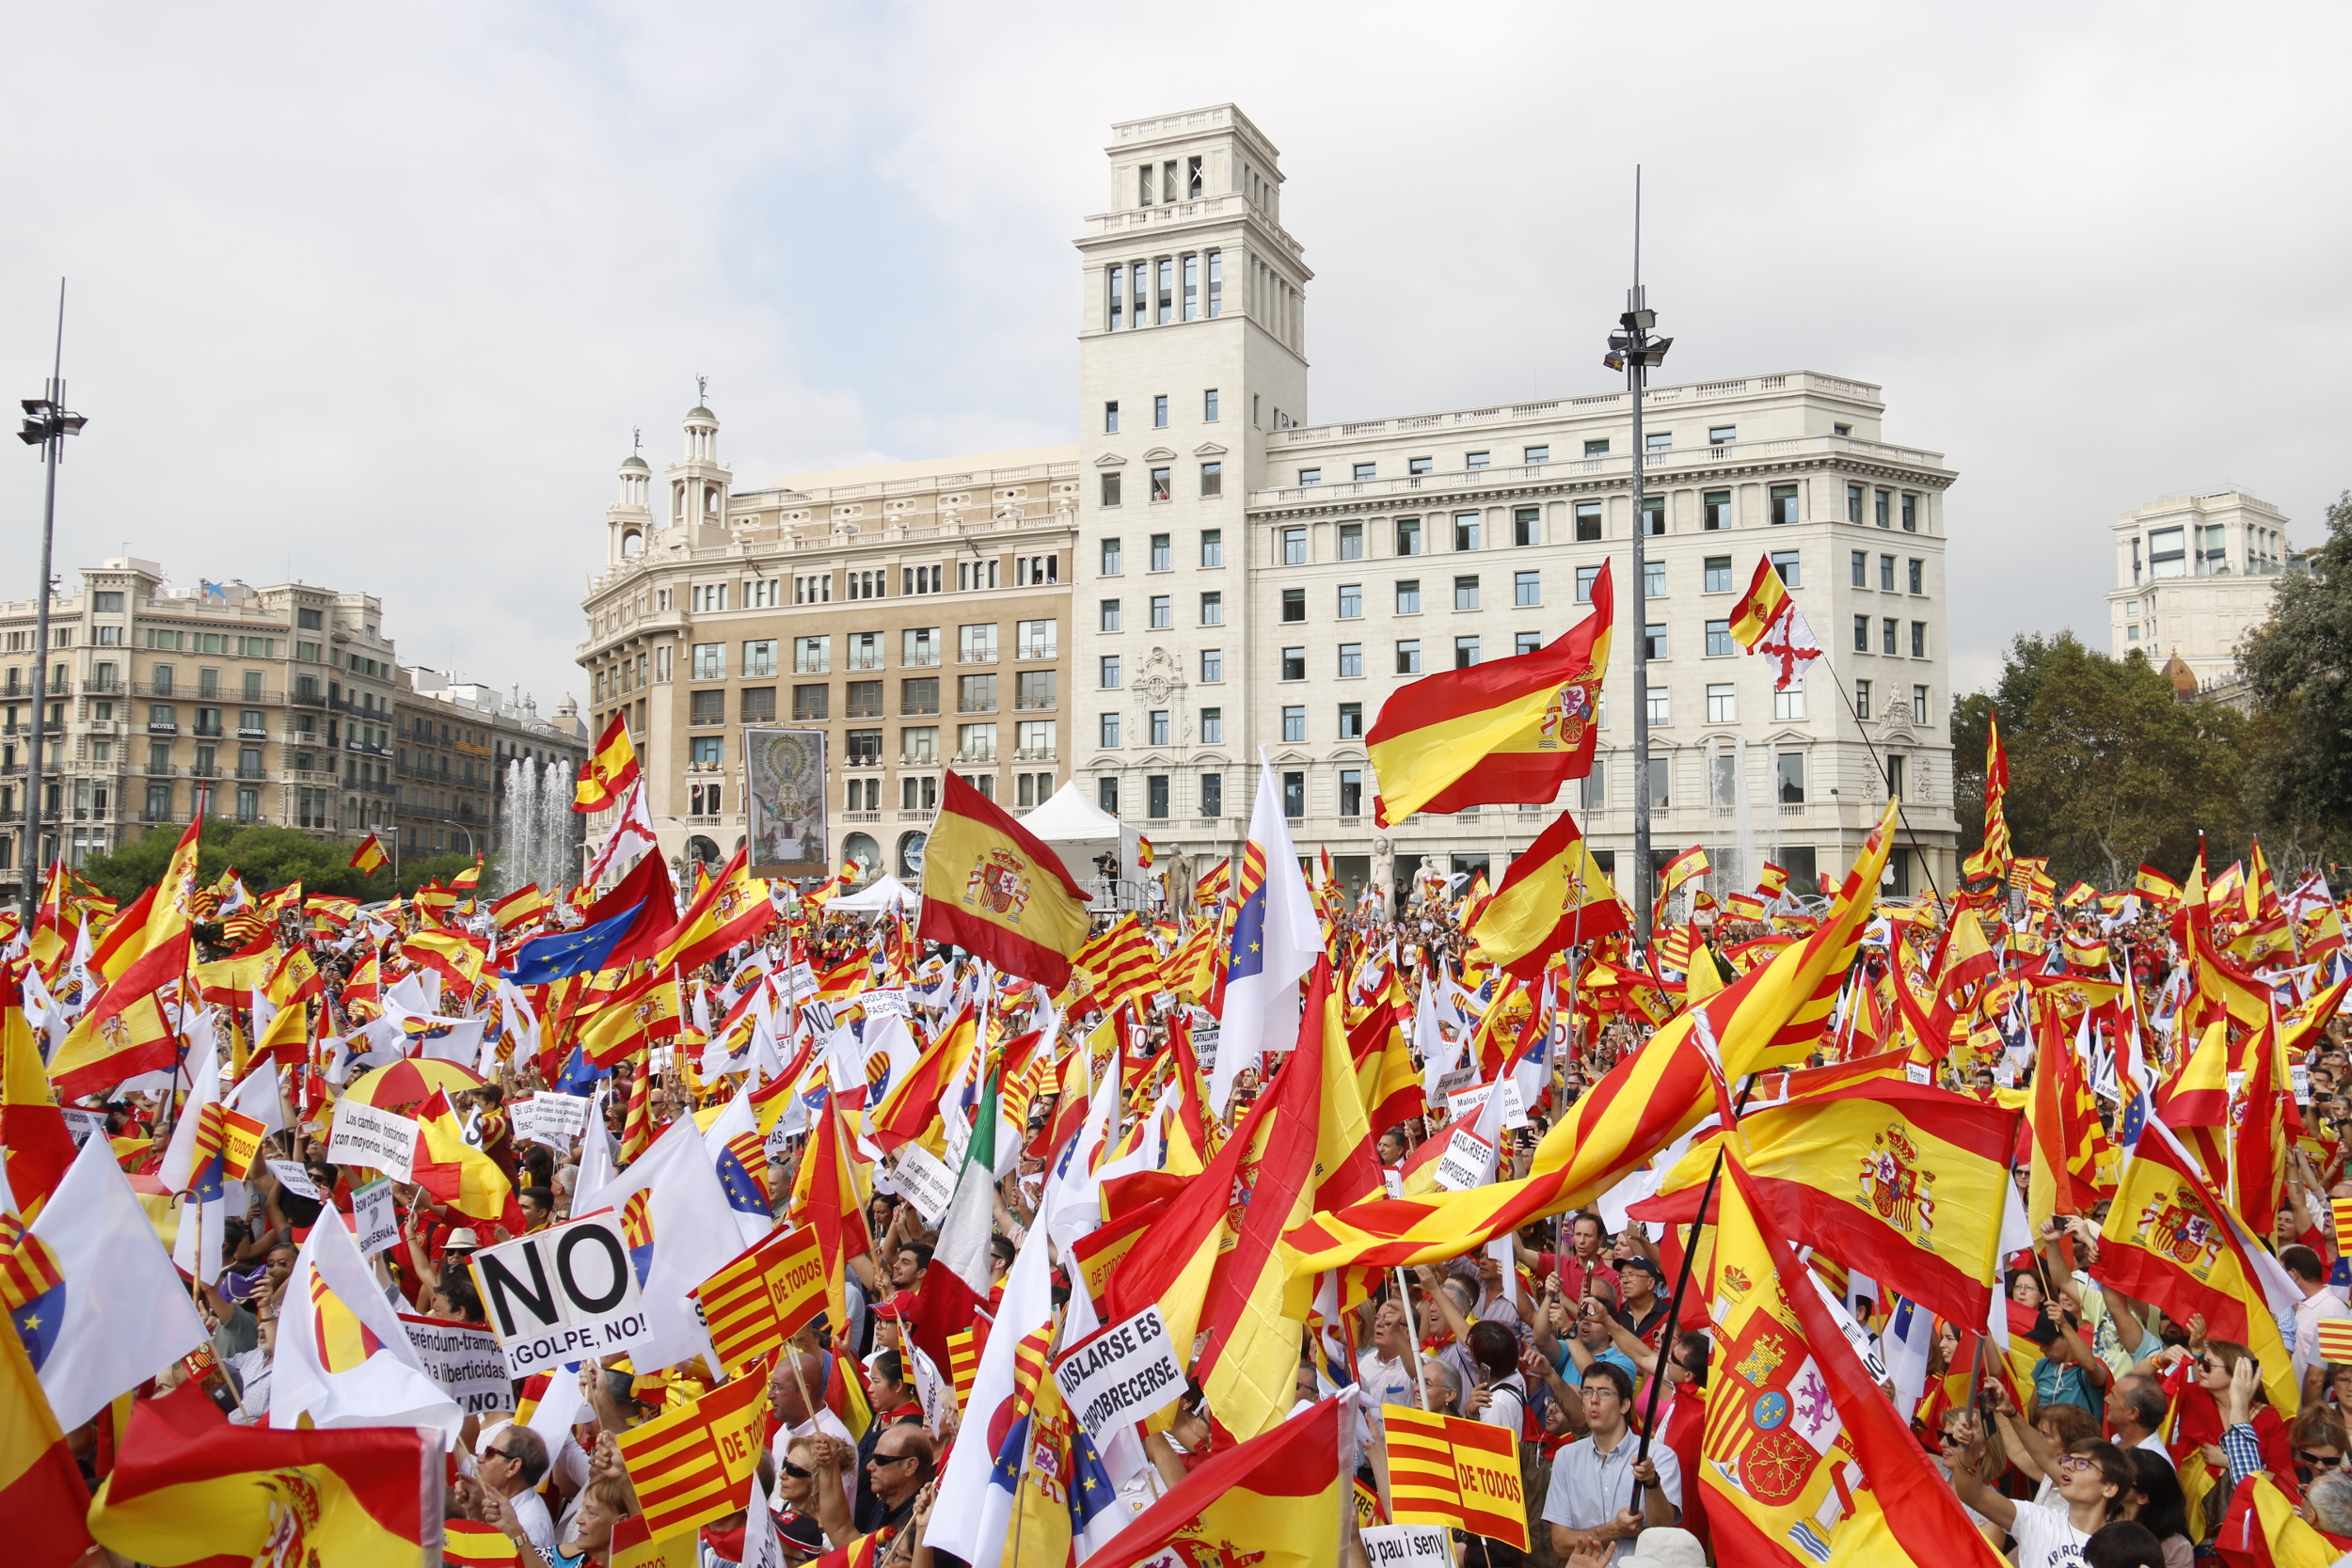 Spanish flags in the rally in Barcelona in favor of Spain's unity (by Patricia Mateos)